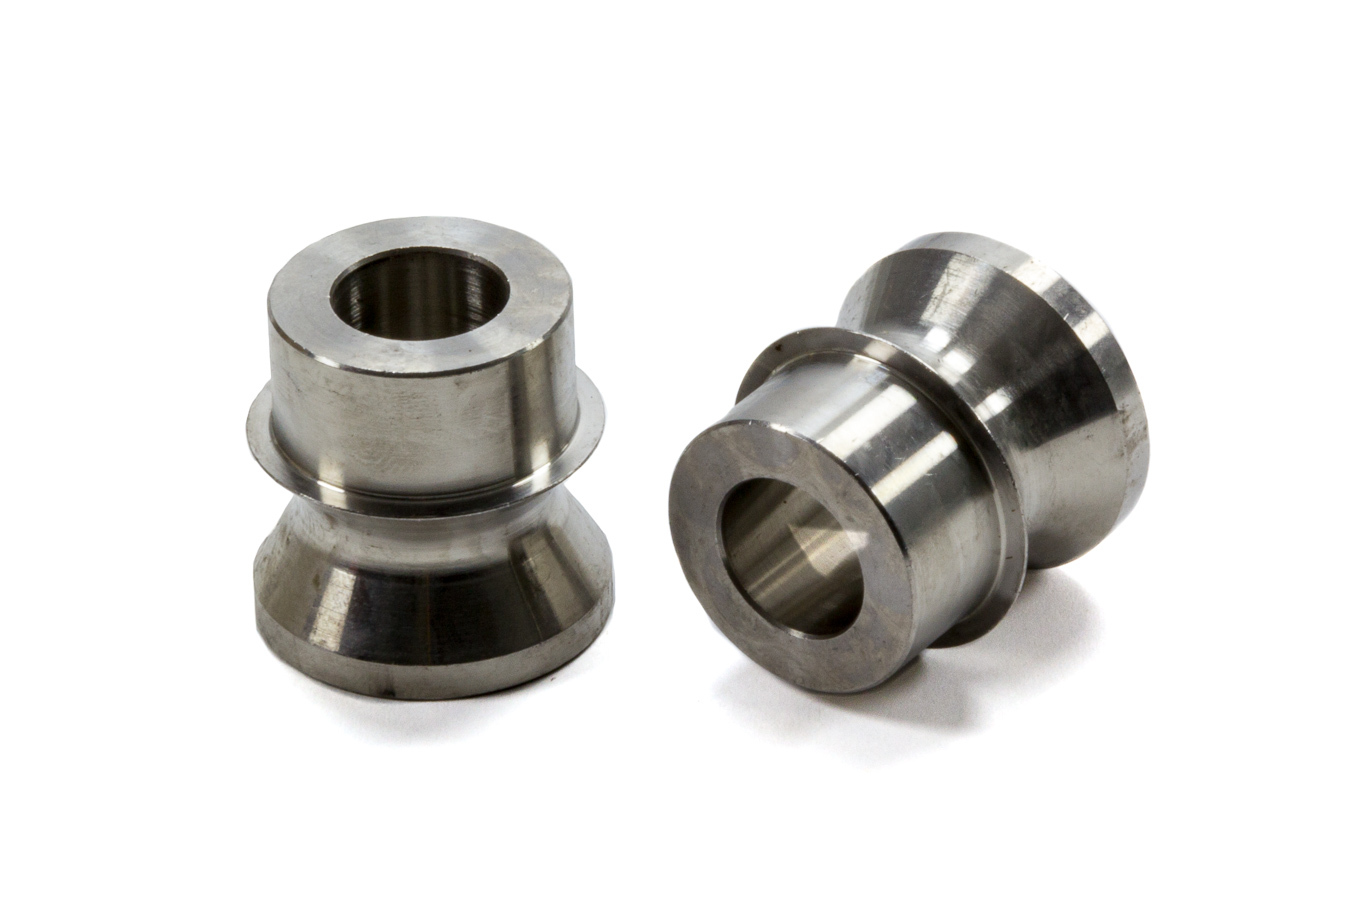 FK Rod Ends 14-10HB Rod End Bushing, 7/8 to 5/8 in Bore, High Misalignment, Steel, Natural, Pair